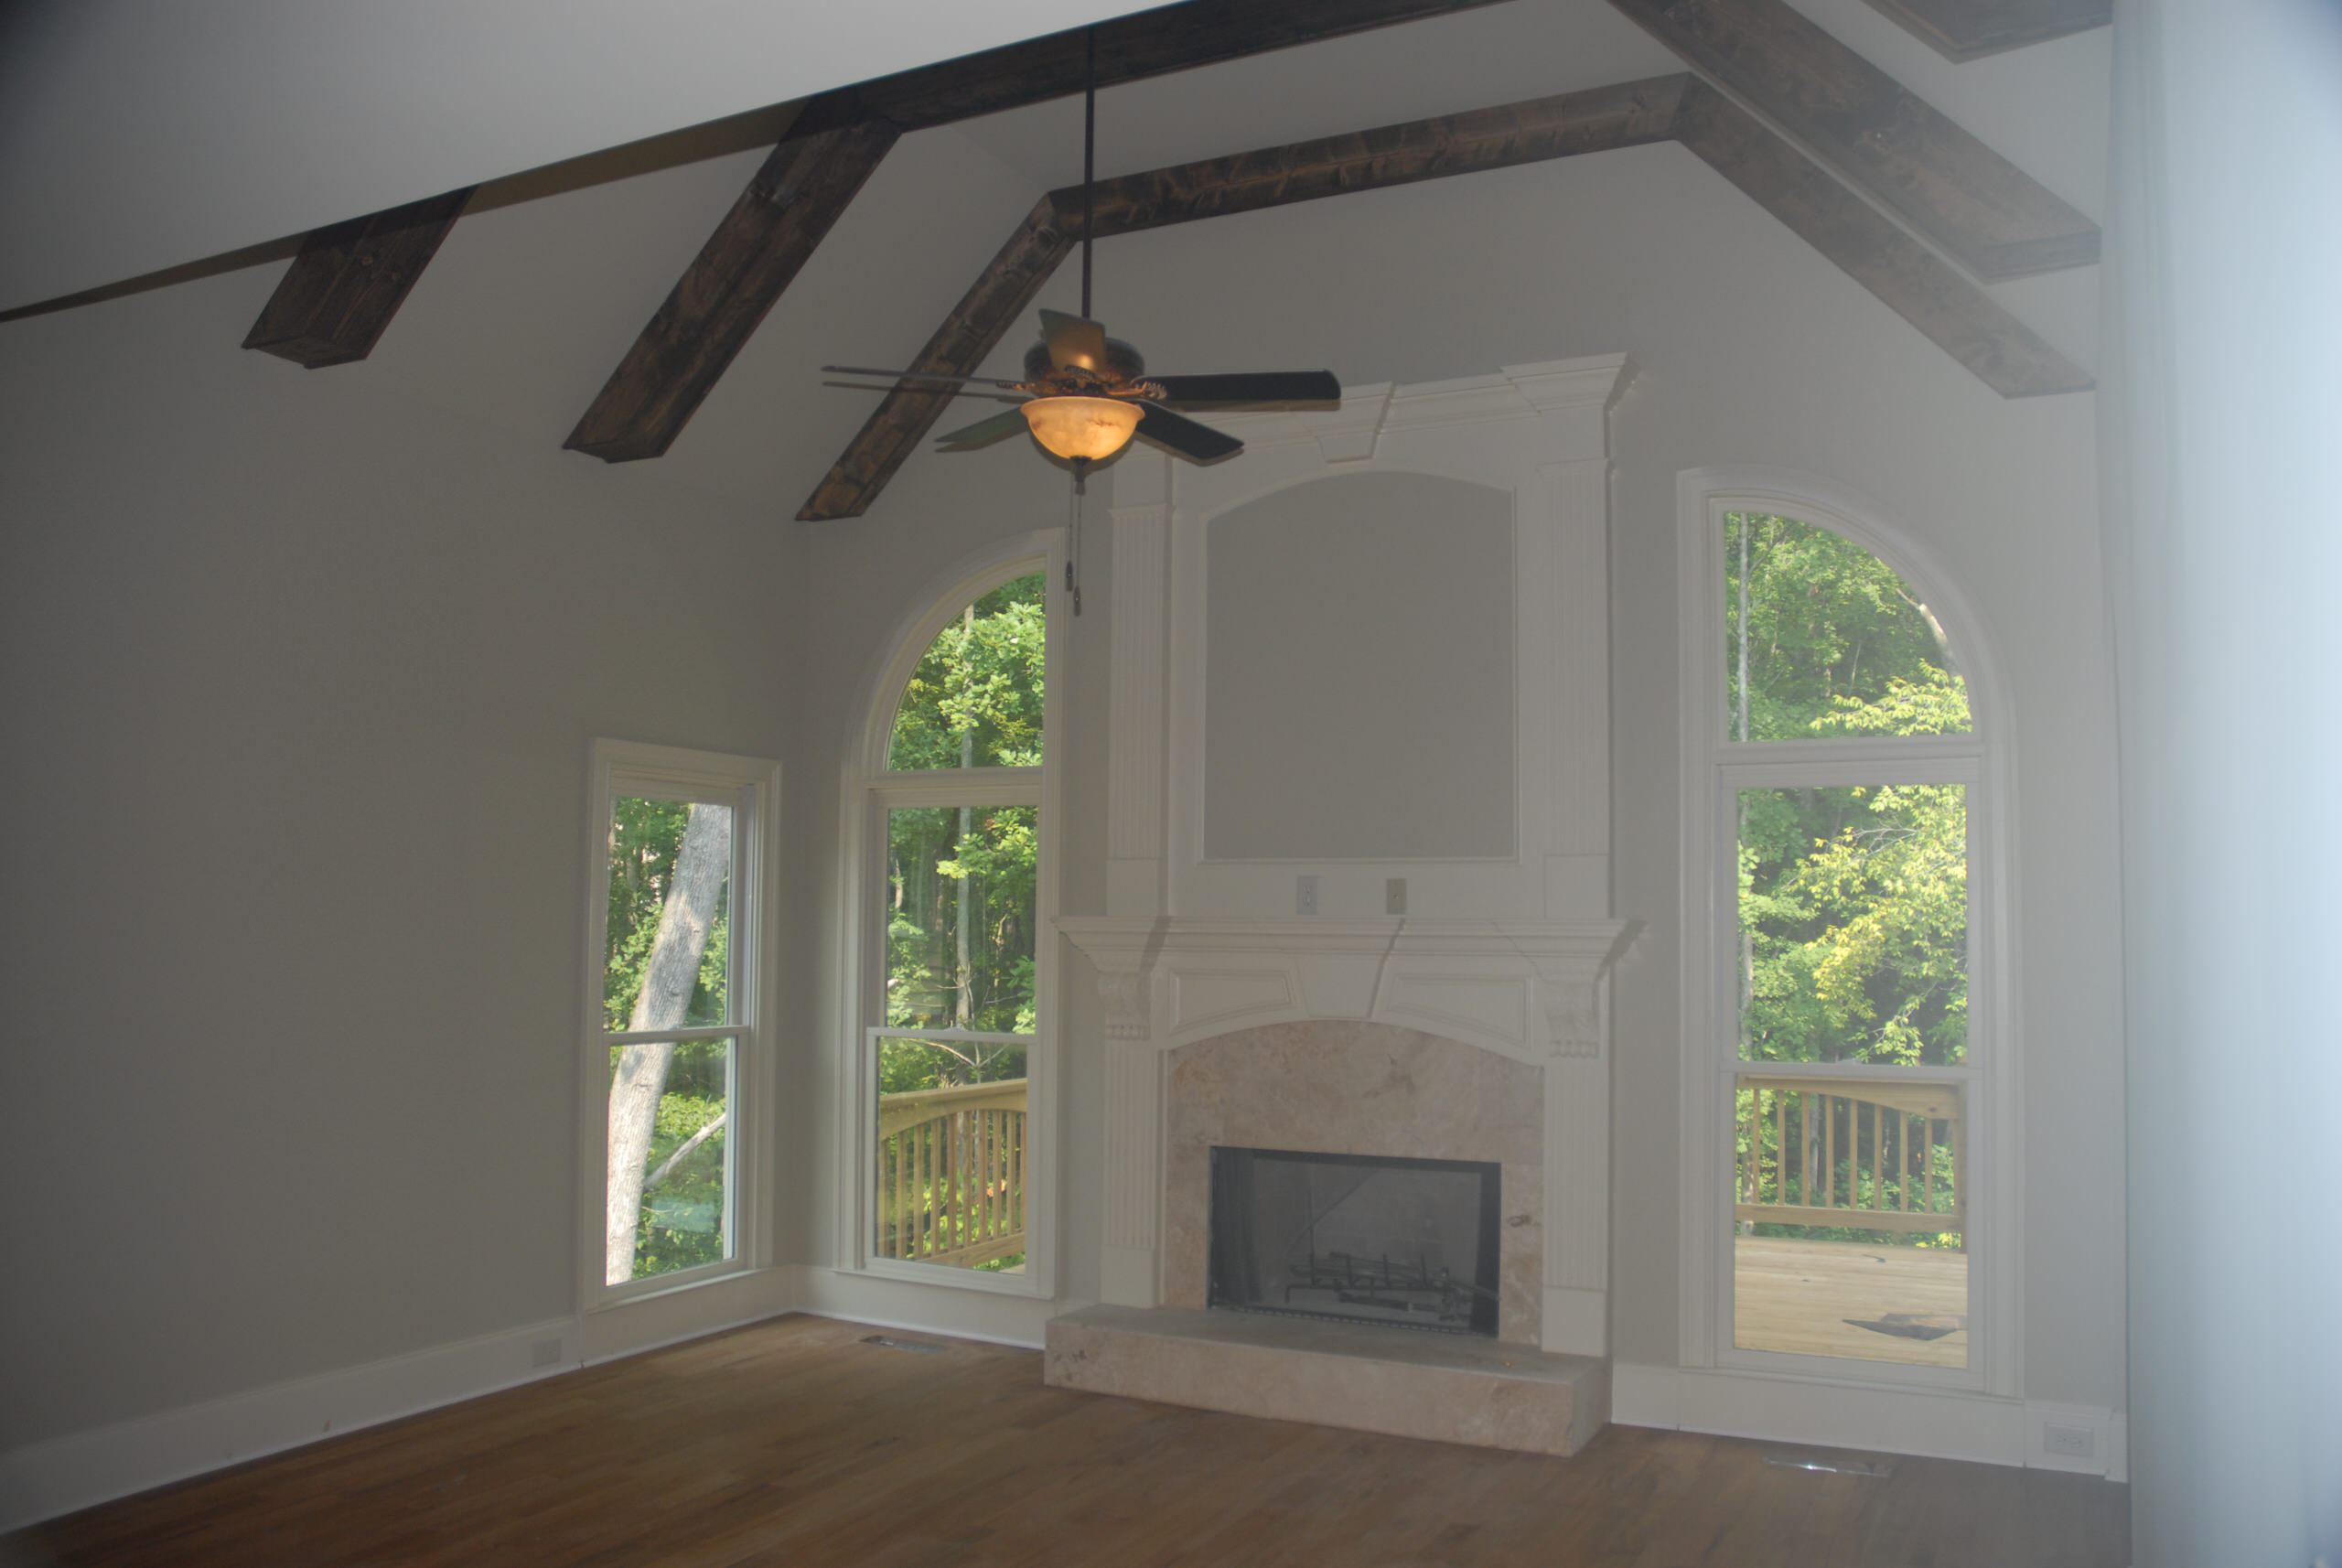 Traditional Custom Home Build with Moldings, Trim, Fireplace & Mantle